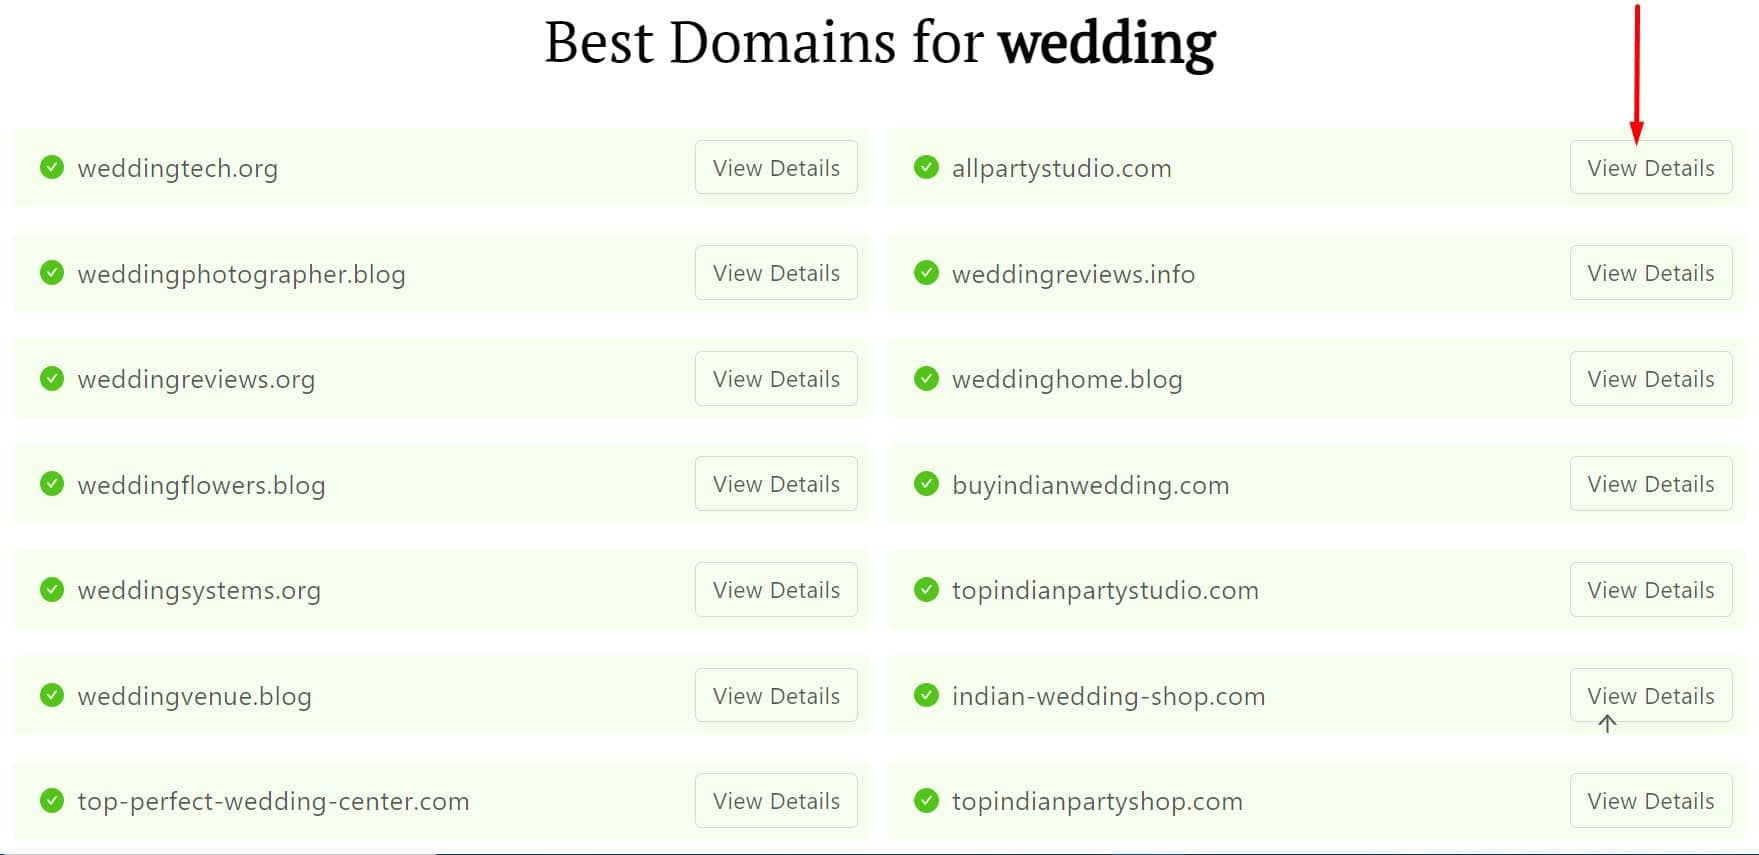 View domain details for "wedding"